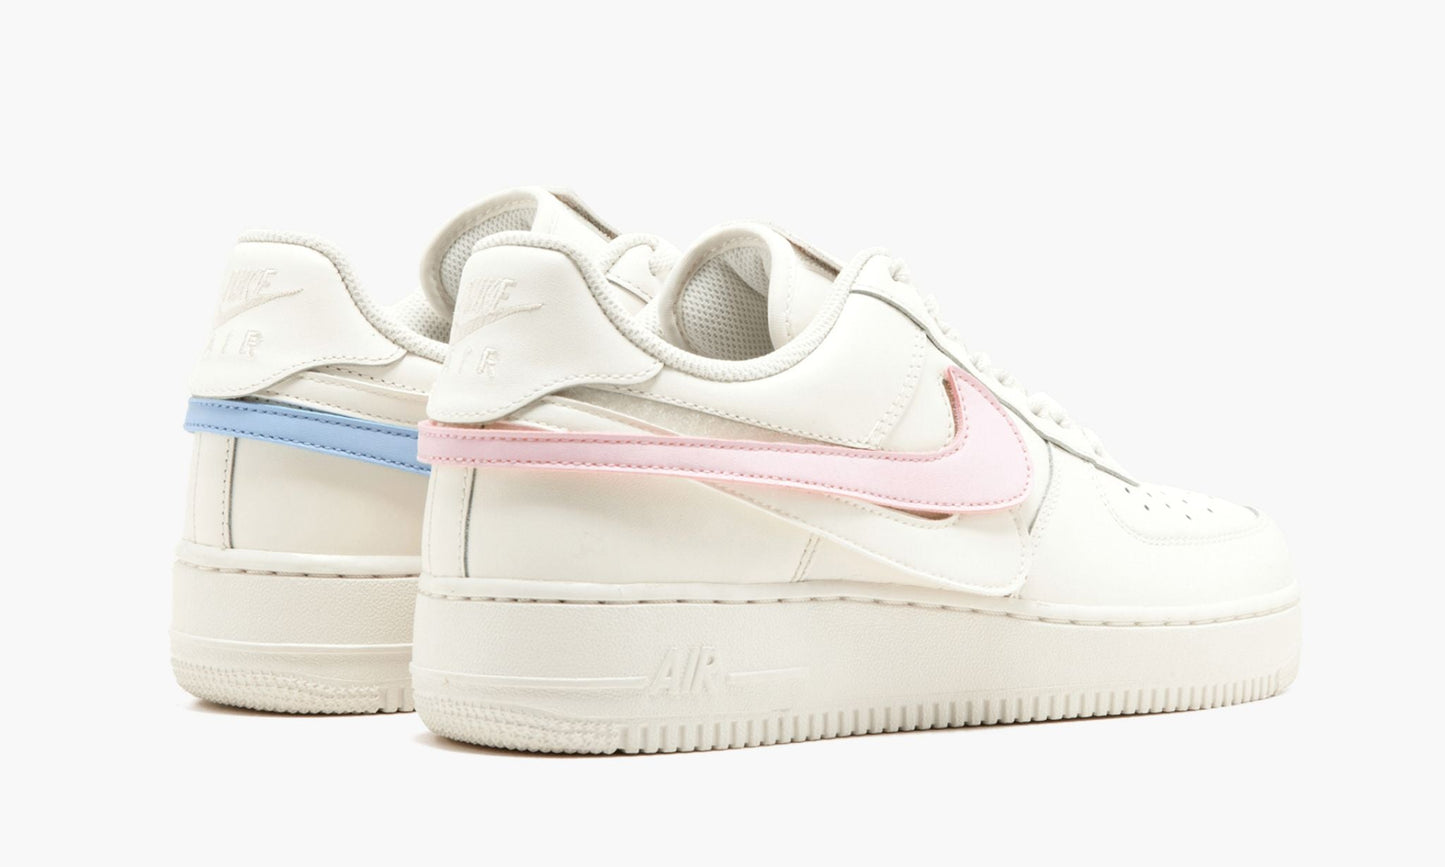 Air Force 1 '07 QS "Replaceable Swoosh Pack - Sail"